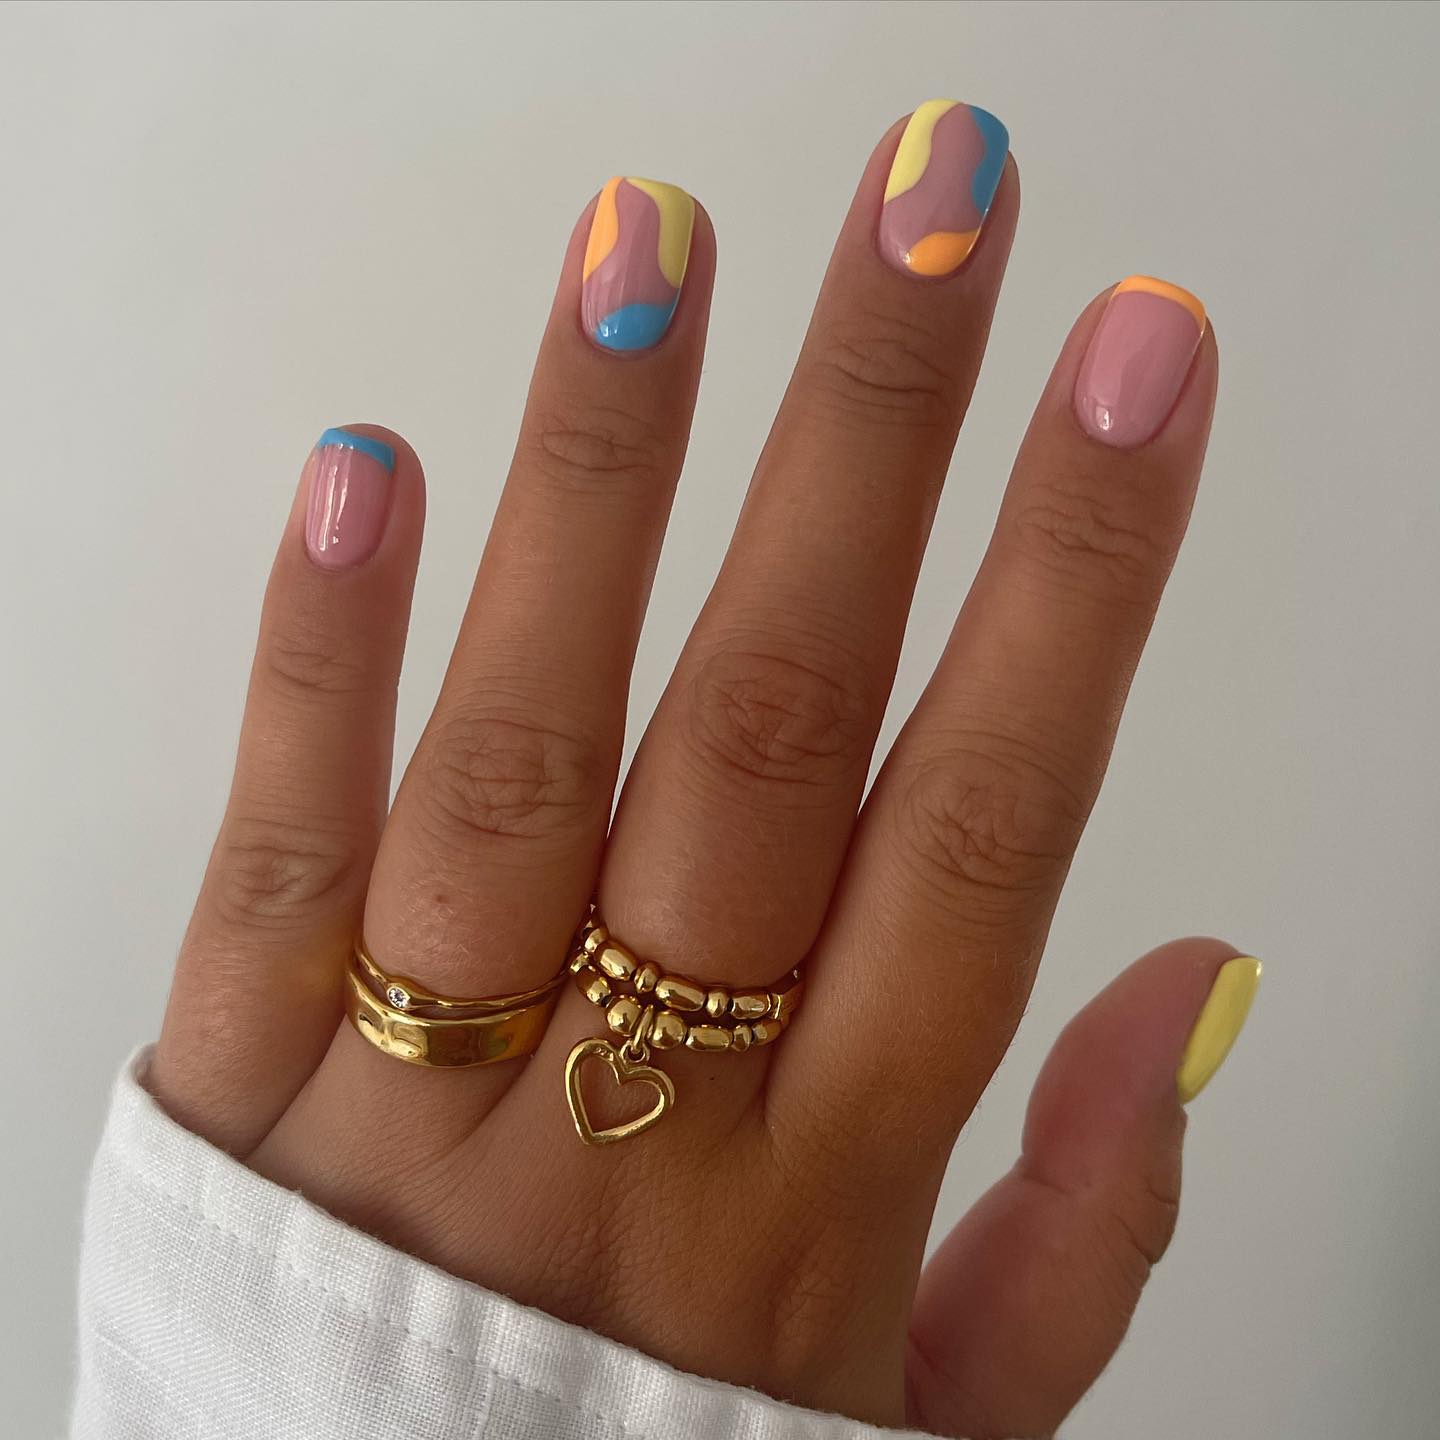 Pastel colors do not have to be something dark. Pastel yellow, orange and blue swirls are nice to give a shot.